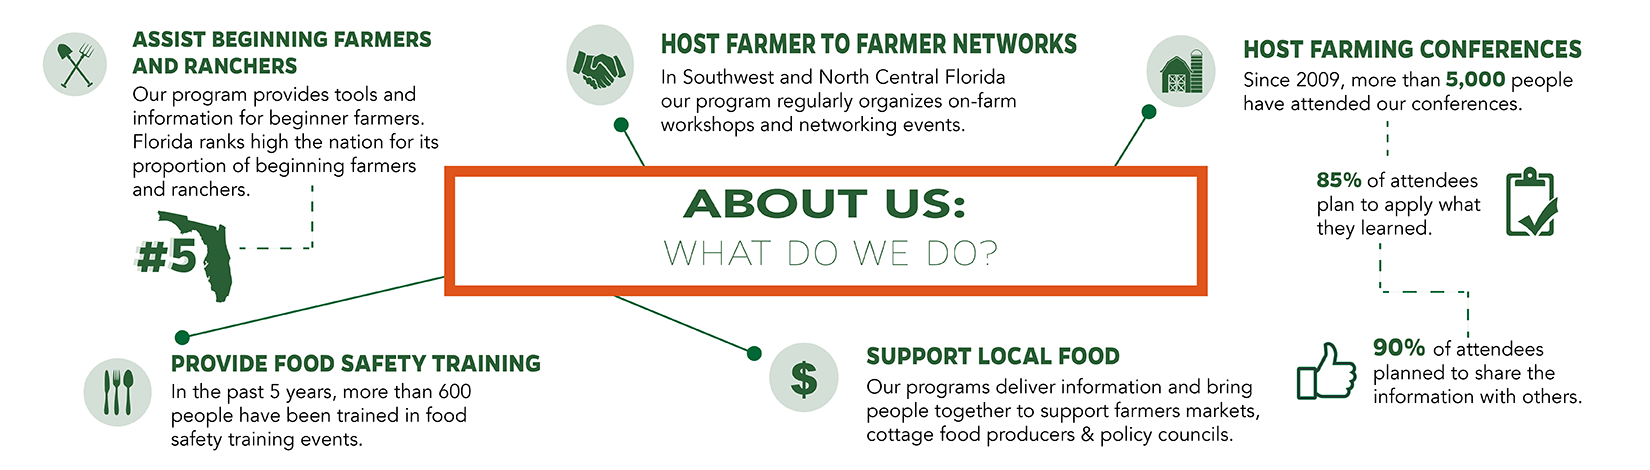 What do we do: 1- Assist beginning farmers and ranchers 2- Host farmer-to-farmer networks 3- Host farming conferences 4- Provide food safety training 5- Support local food 